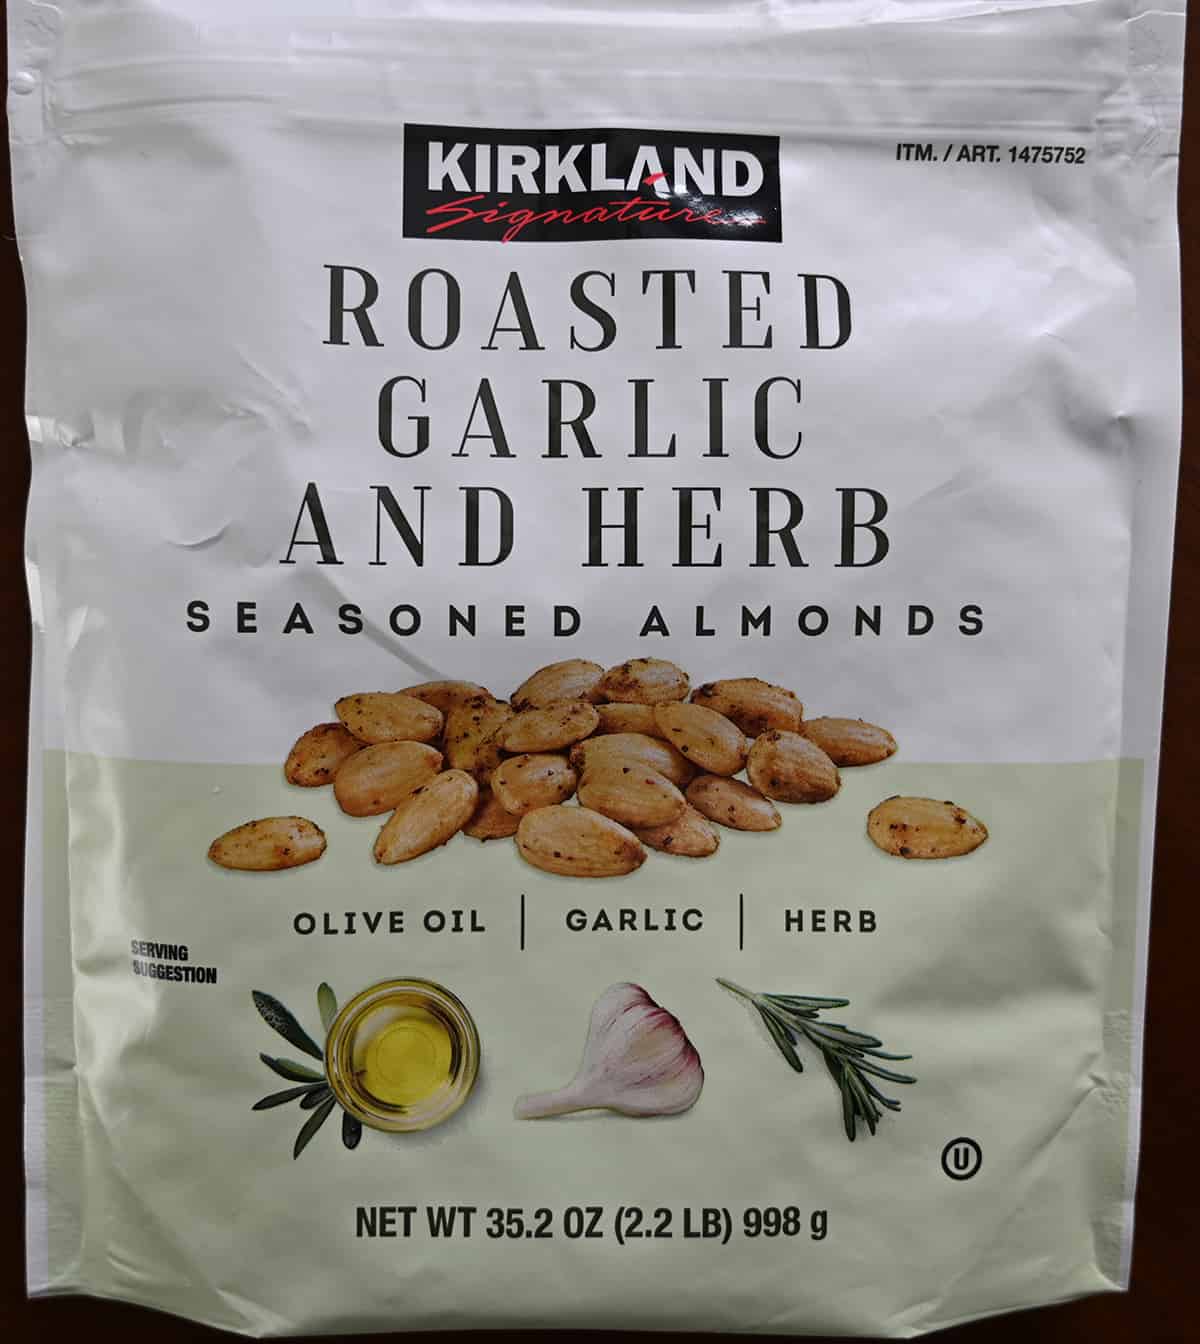 Closeup image of the front of the bag of almonds showing the weight of the bag.